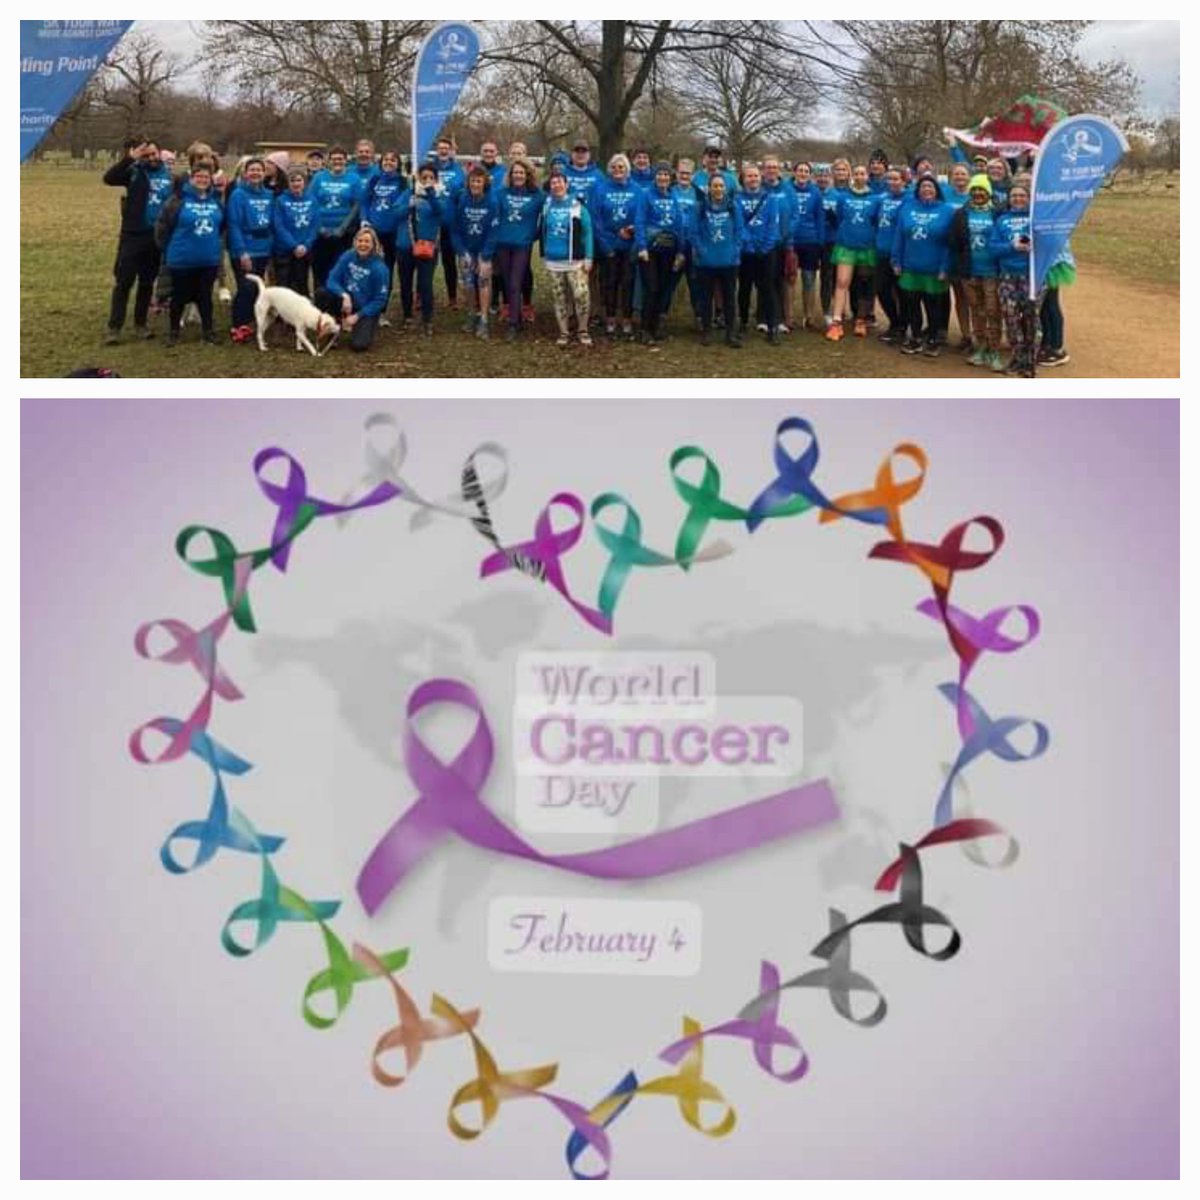 💙 As today is World Cancer Day we're thinking of everyone affected by cancer & in particular our amazing and inspiring members 💙 Yesterday 5k Your Way ambassadors from across the country met at Bushy parkrun to mark the occasion #WorldCancerDay #5kyourway #moveagainstcancer